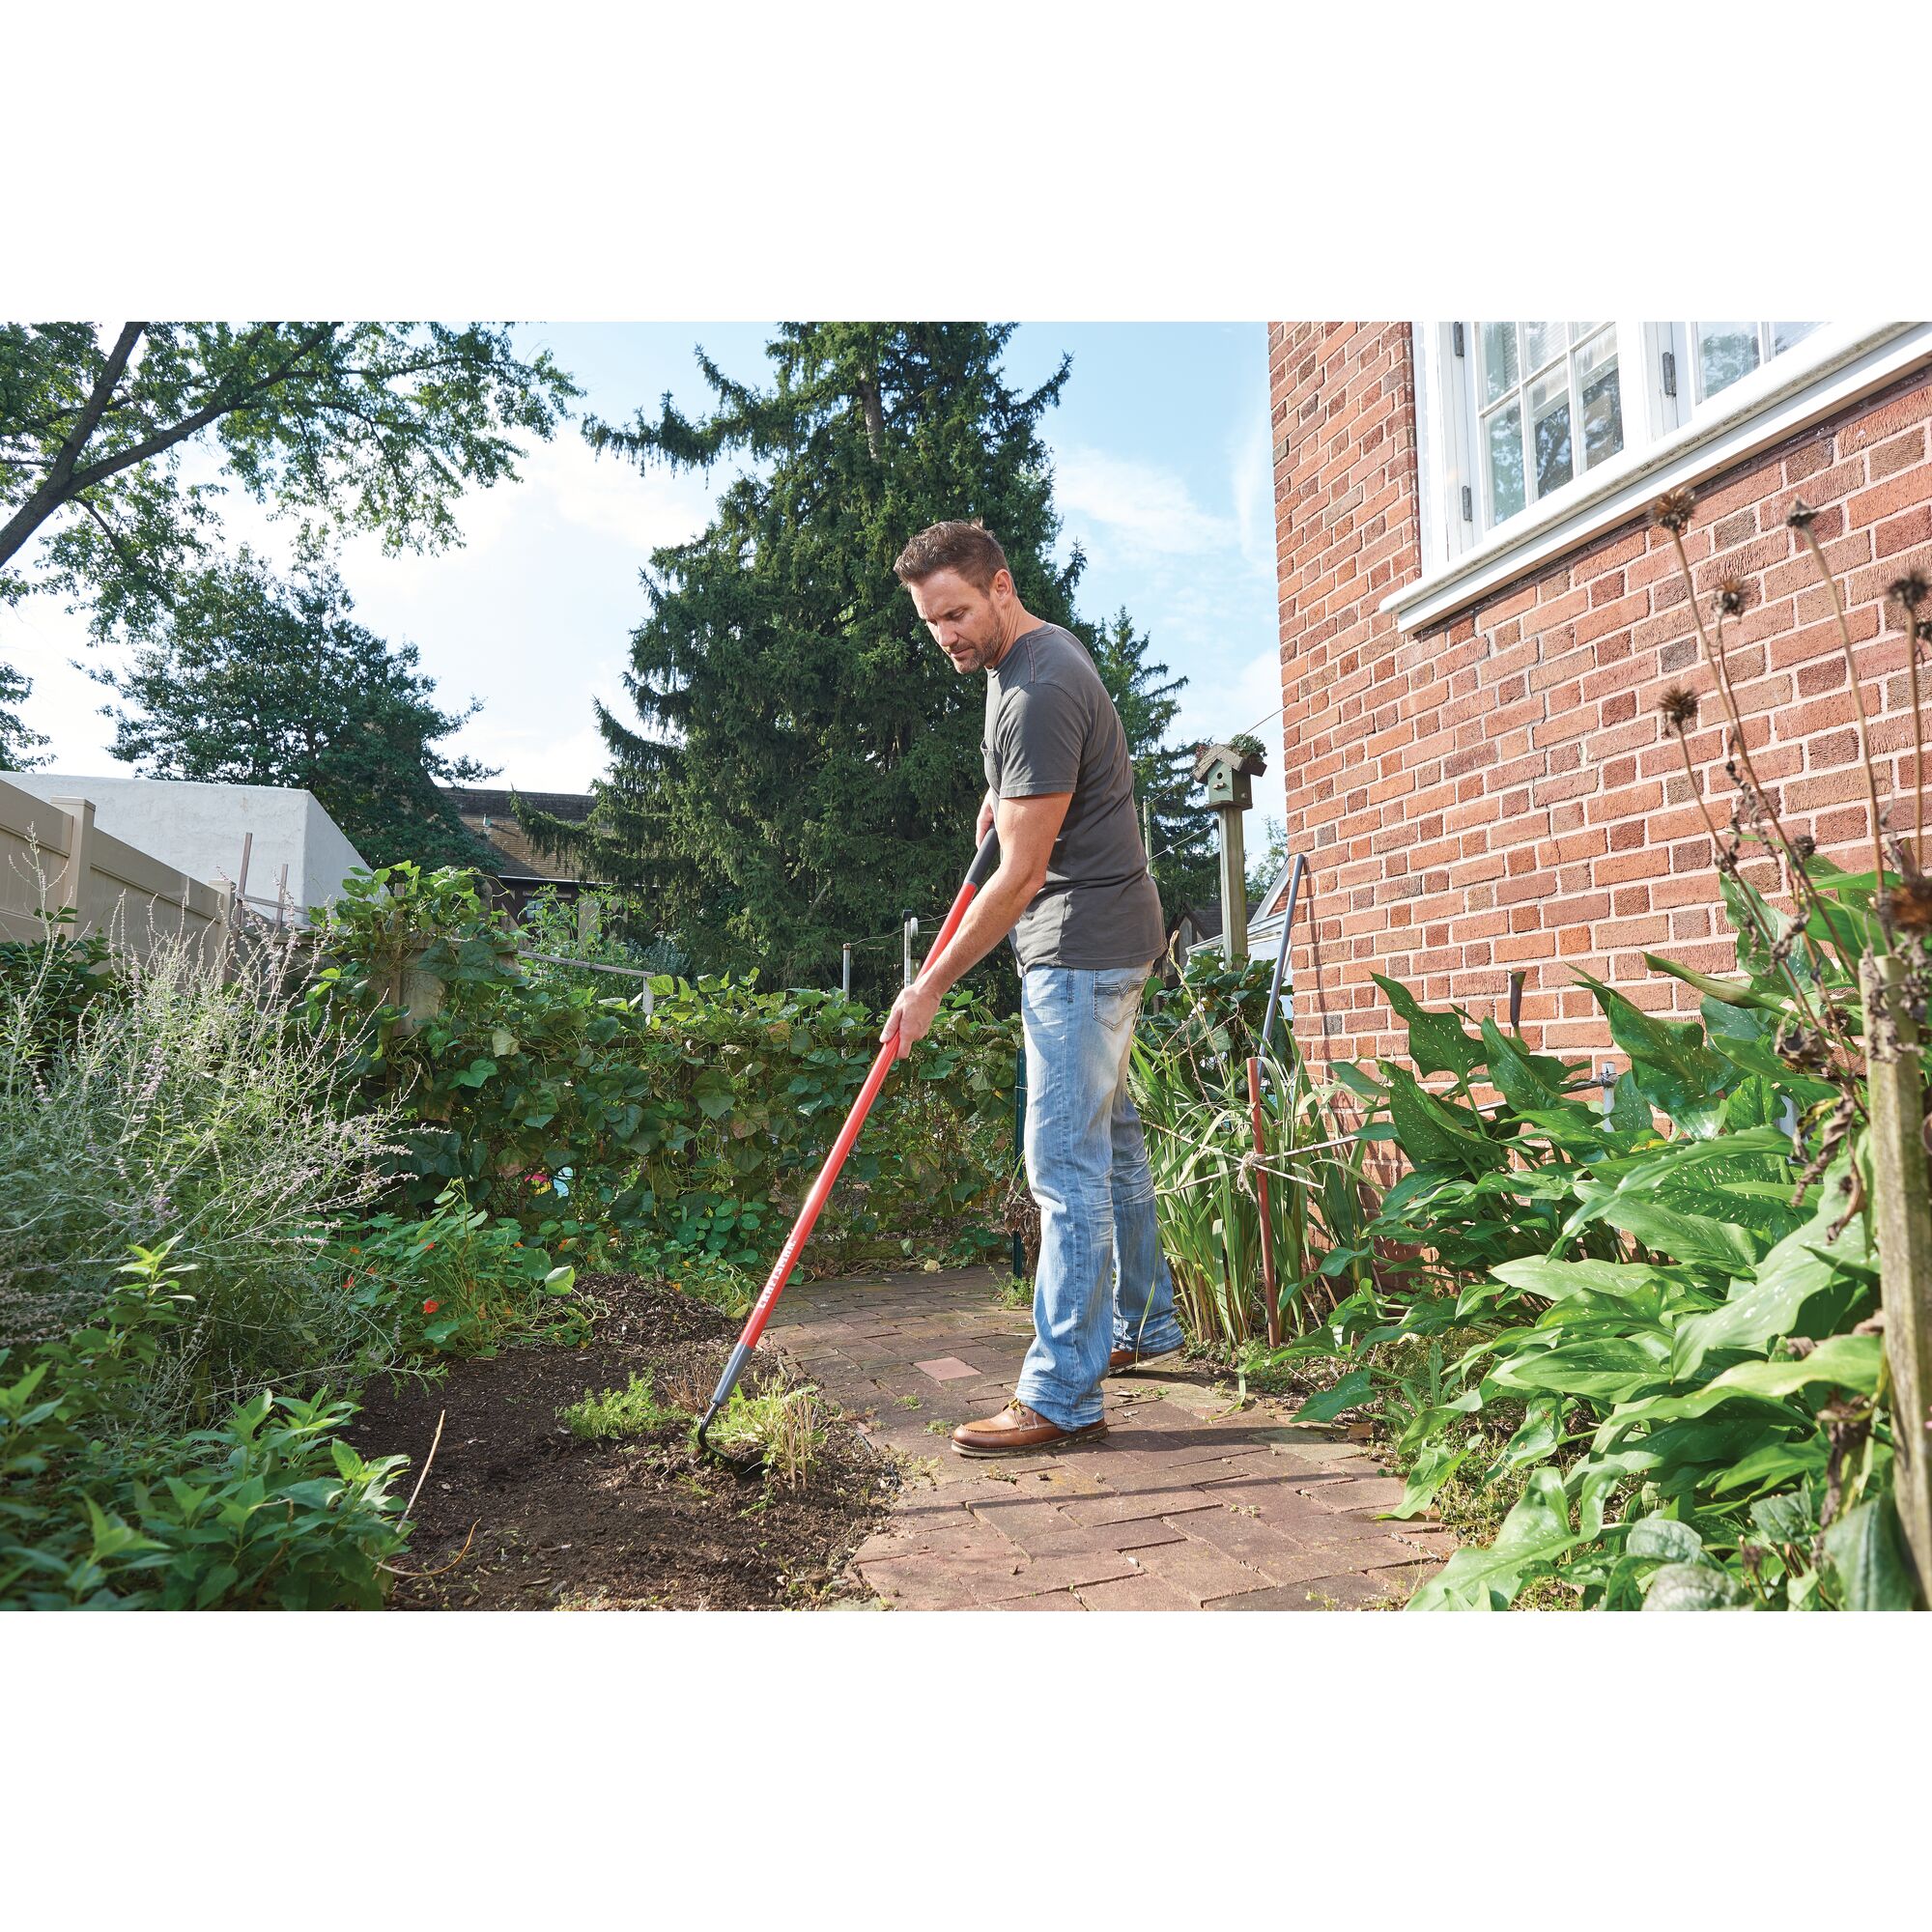 Fiberglass handle garden hoe being used by a person.